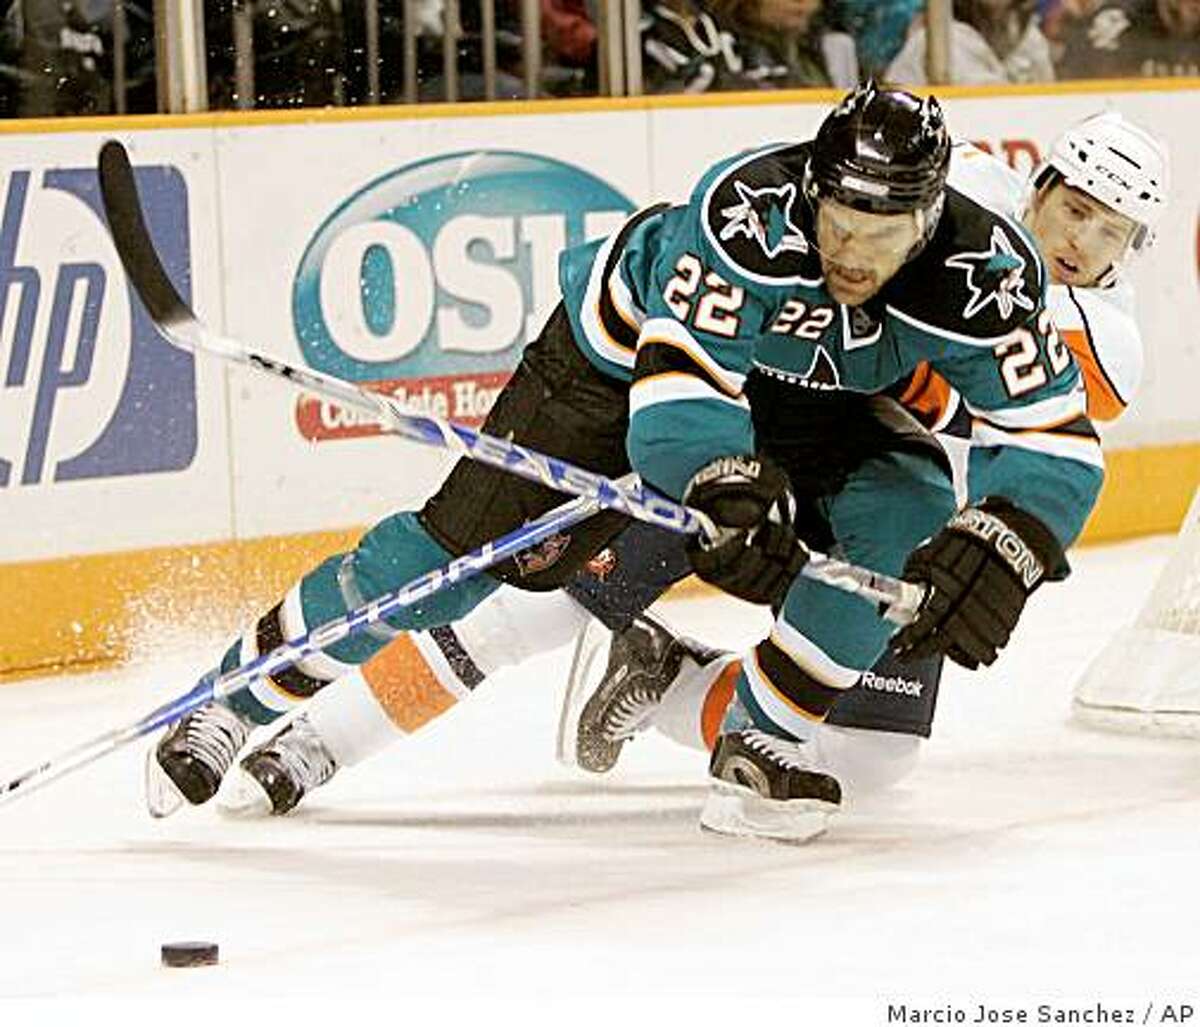 San Jose Sharks defenseman Dan Boyle goes for the puck in front of New York Islanders left wing Blake Comeau during the third period of a game in San Jose, Calif. on Saturday, Jan. 3, 2009. San Jose won 5-3.